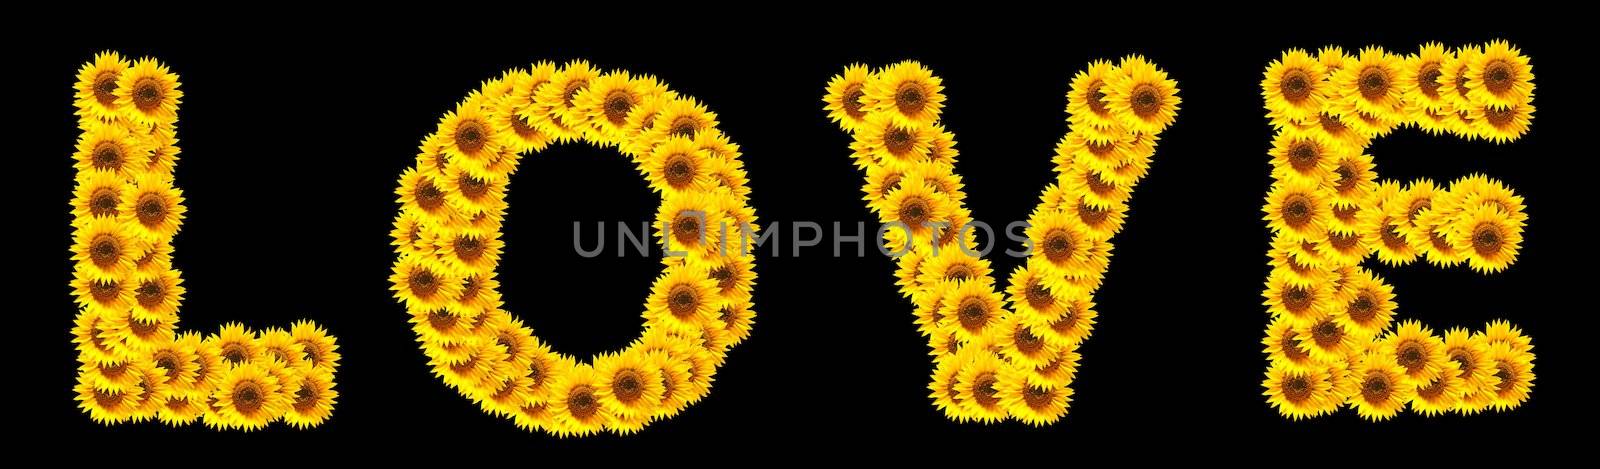 word love with sunflower flowers showing valentines day concept